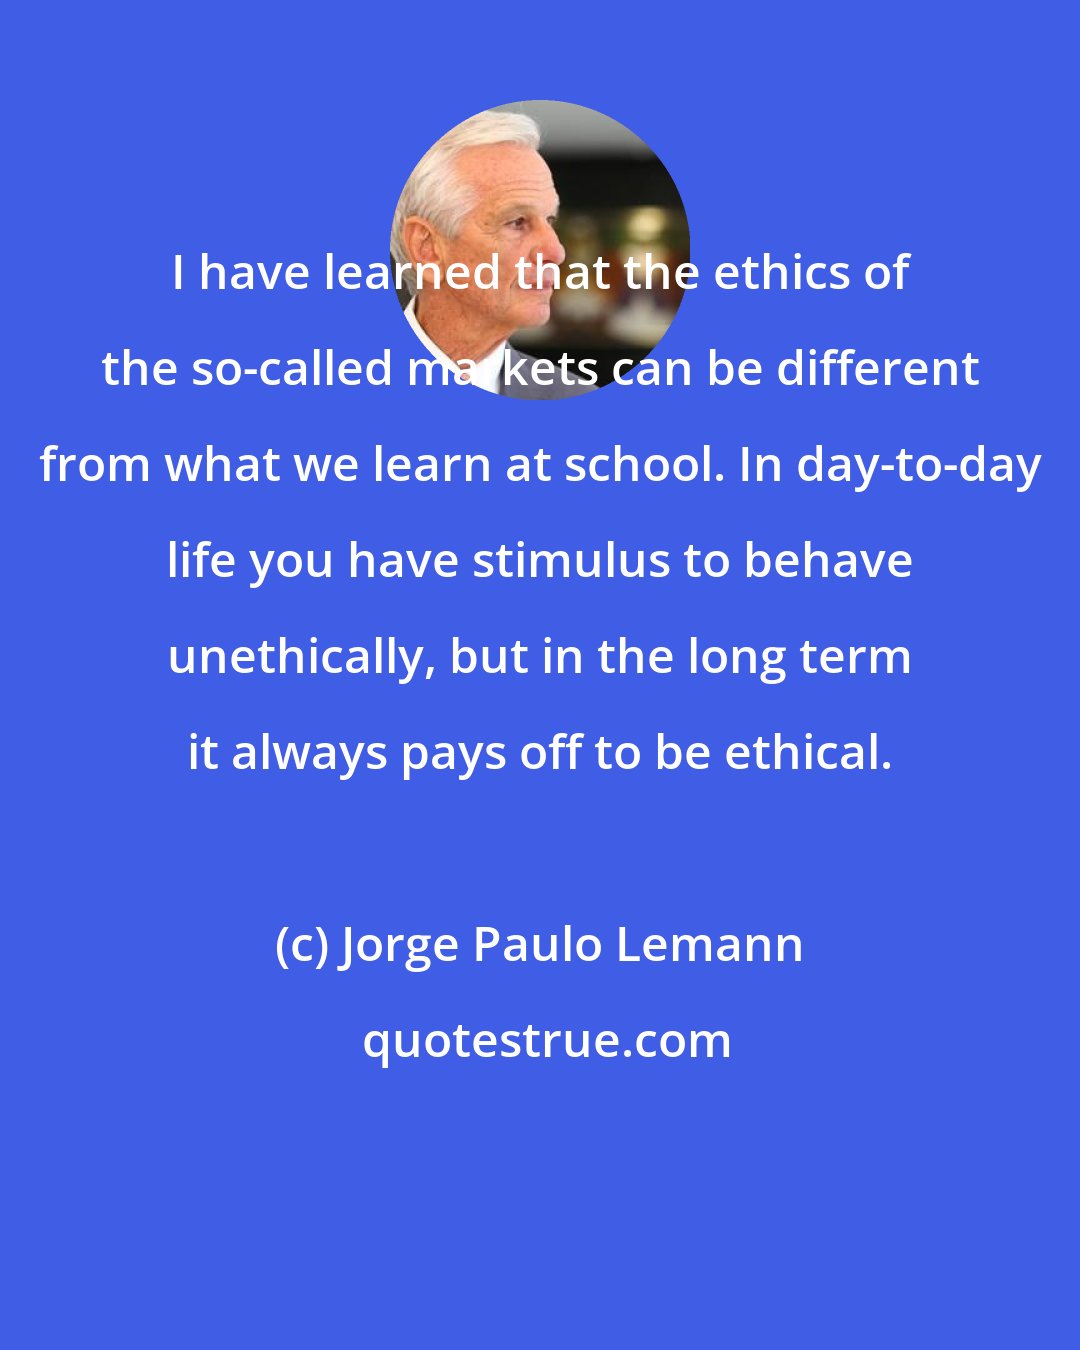 Jorge Paulo Lemann: I have learned that the ethics of the so-called markets can be different from what we learn at school. In day-to-day life you have stimulus to behave unethically, but in the long term it always pays off to be ethical.